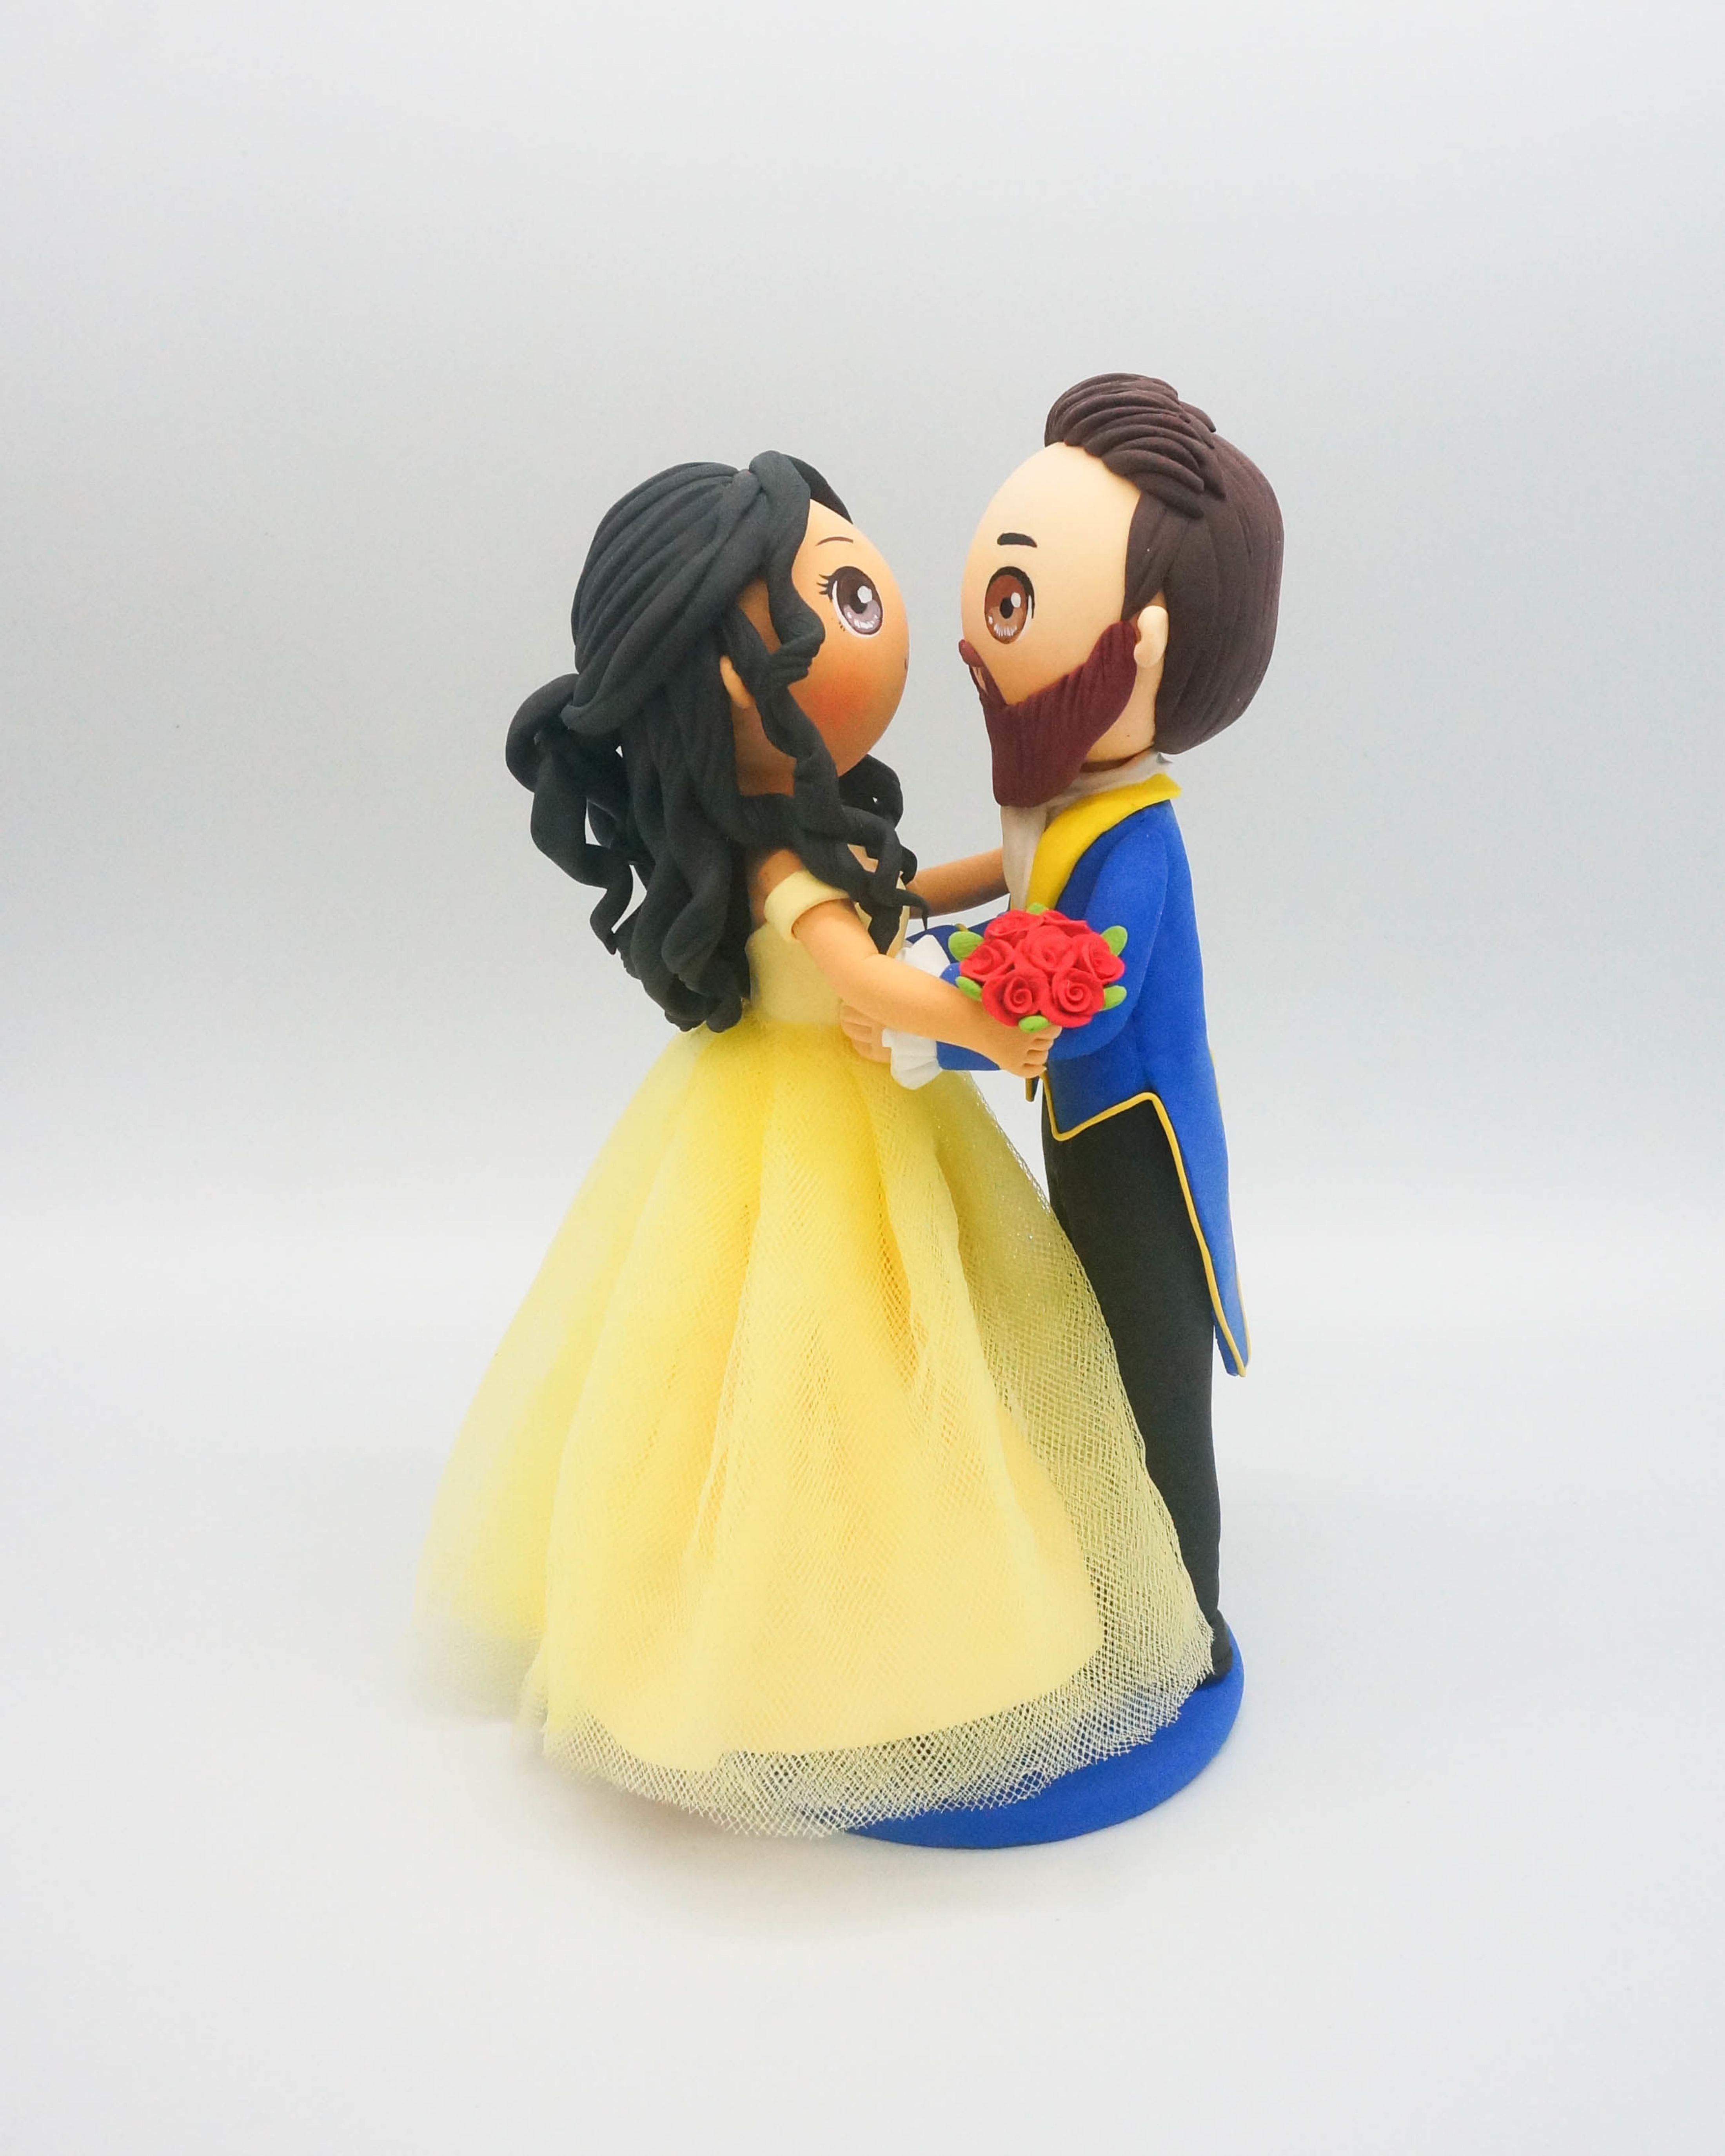 Picture of Beauty and the beast wedding cake topper, Disney wedding dance topper